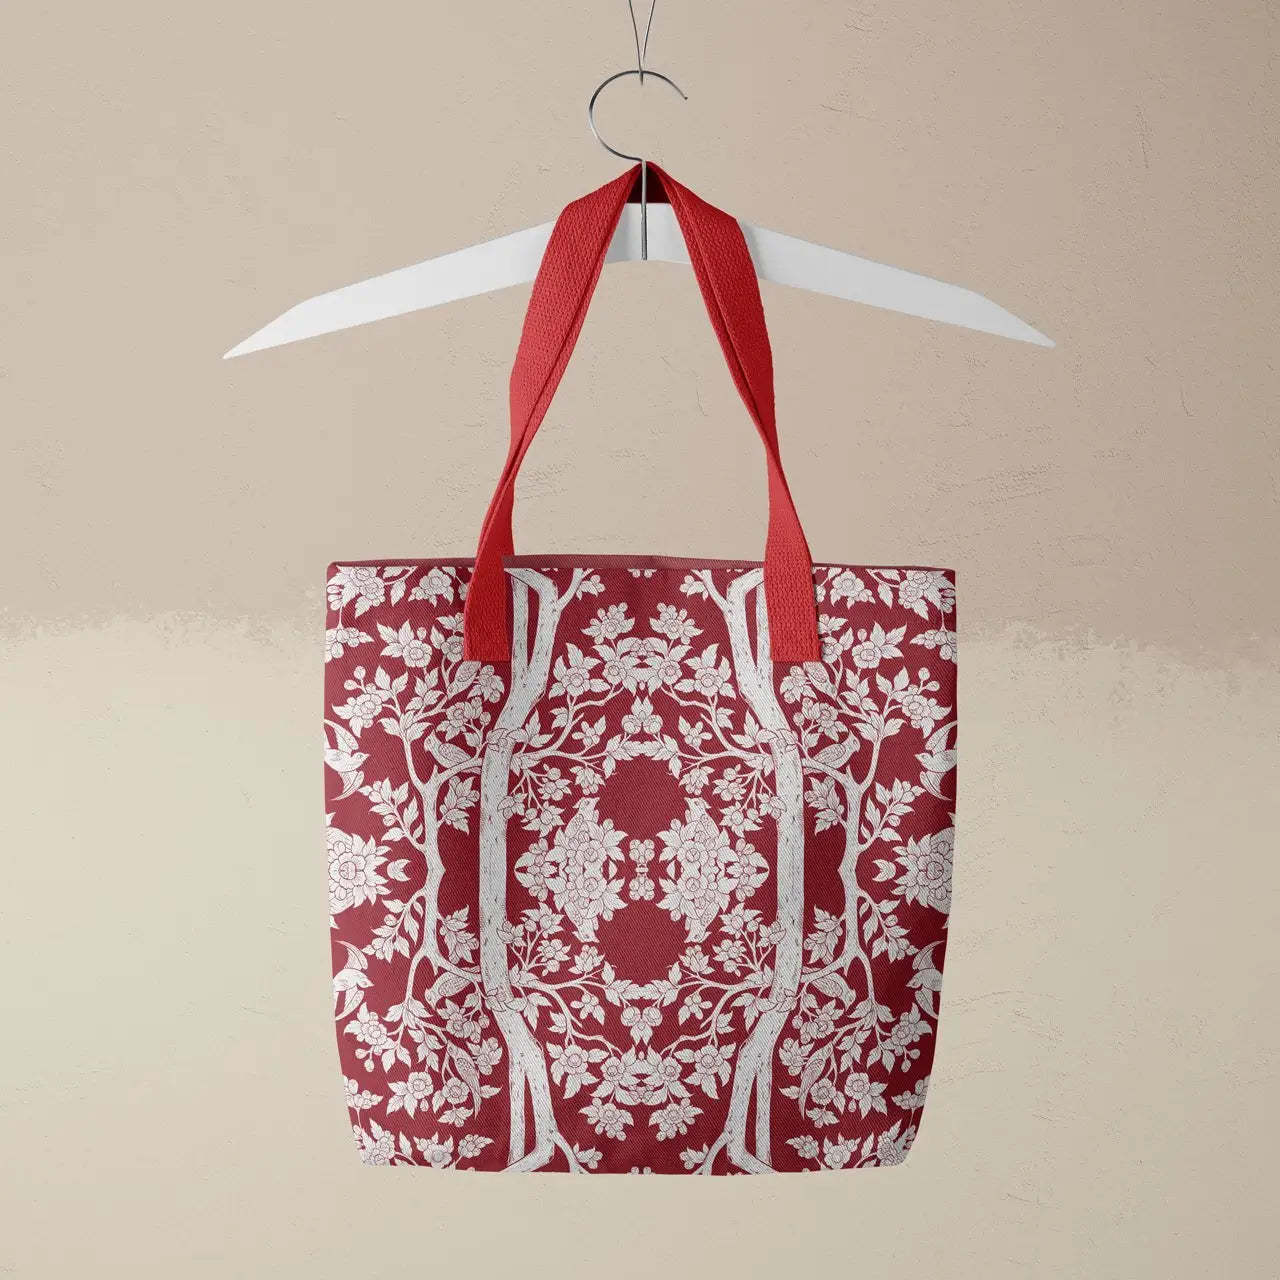 Aviary Tote - Rosella - Heavy Duty Reusable Grocery Bag - Red Handles - Tote Bags - Aesthetic Art